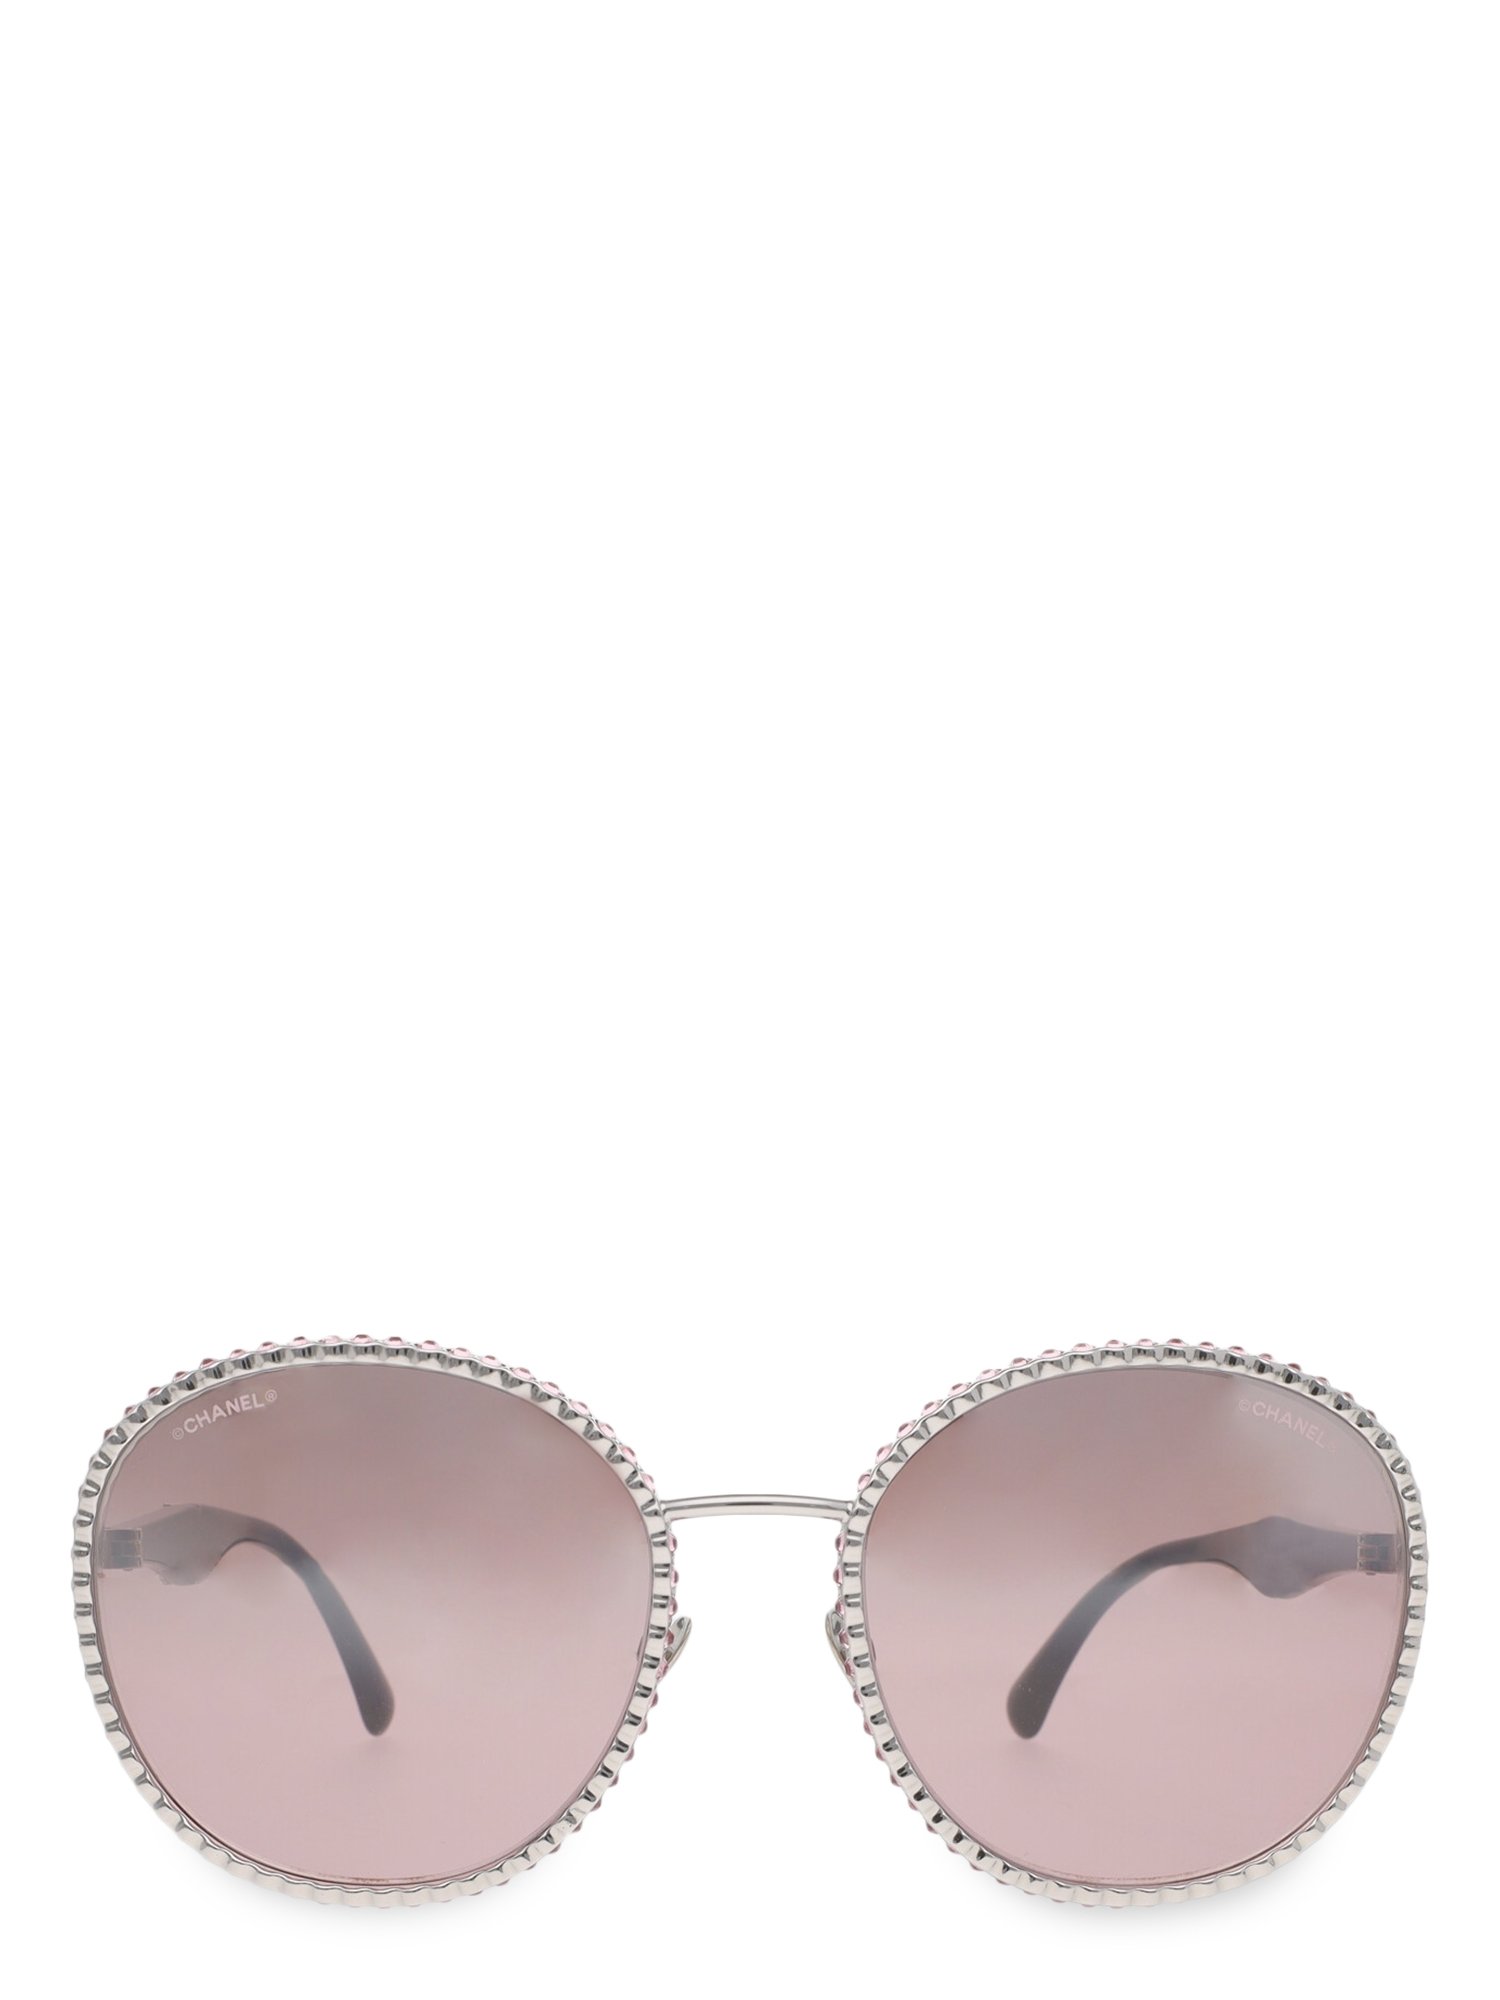 Rounded sunglasses by Chanel